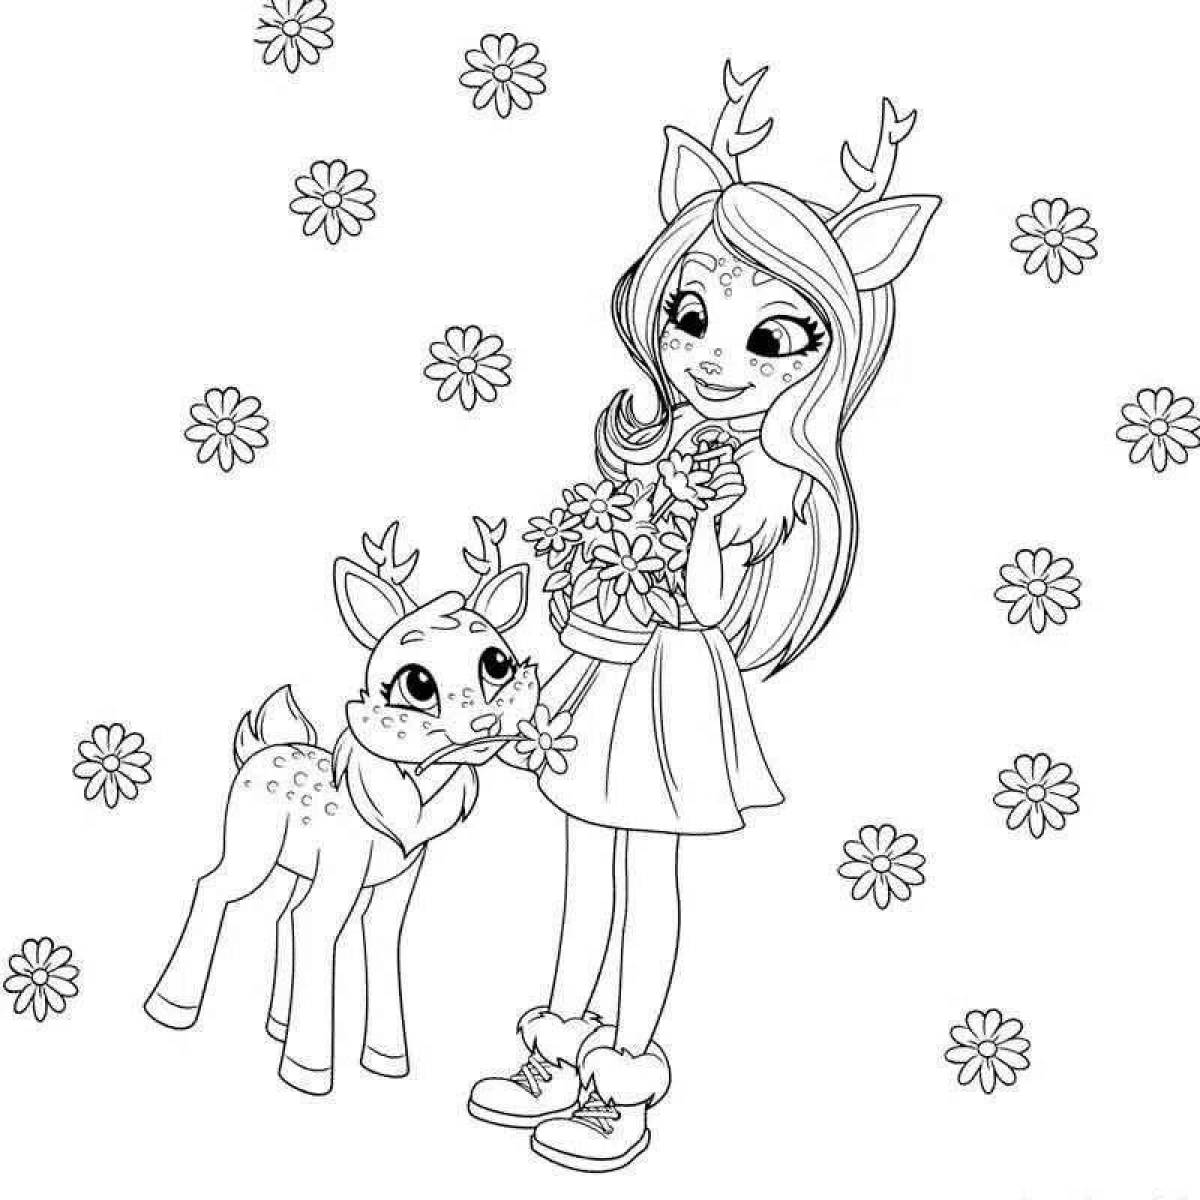 Radiant inchanchymus coloring page